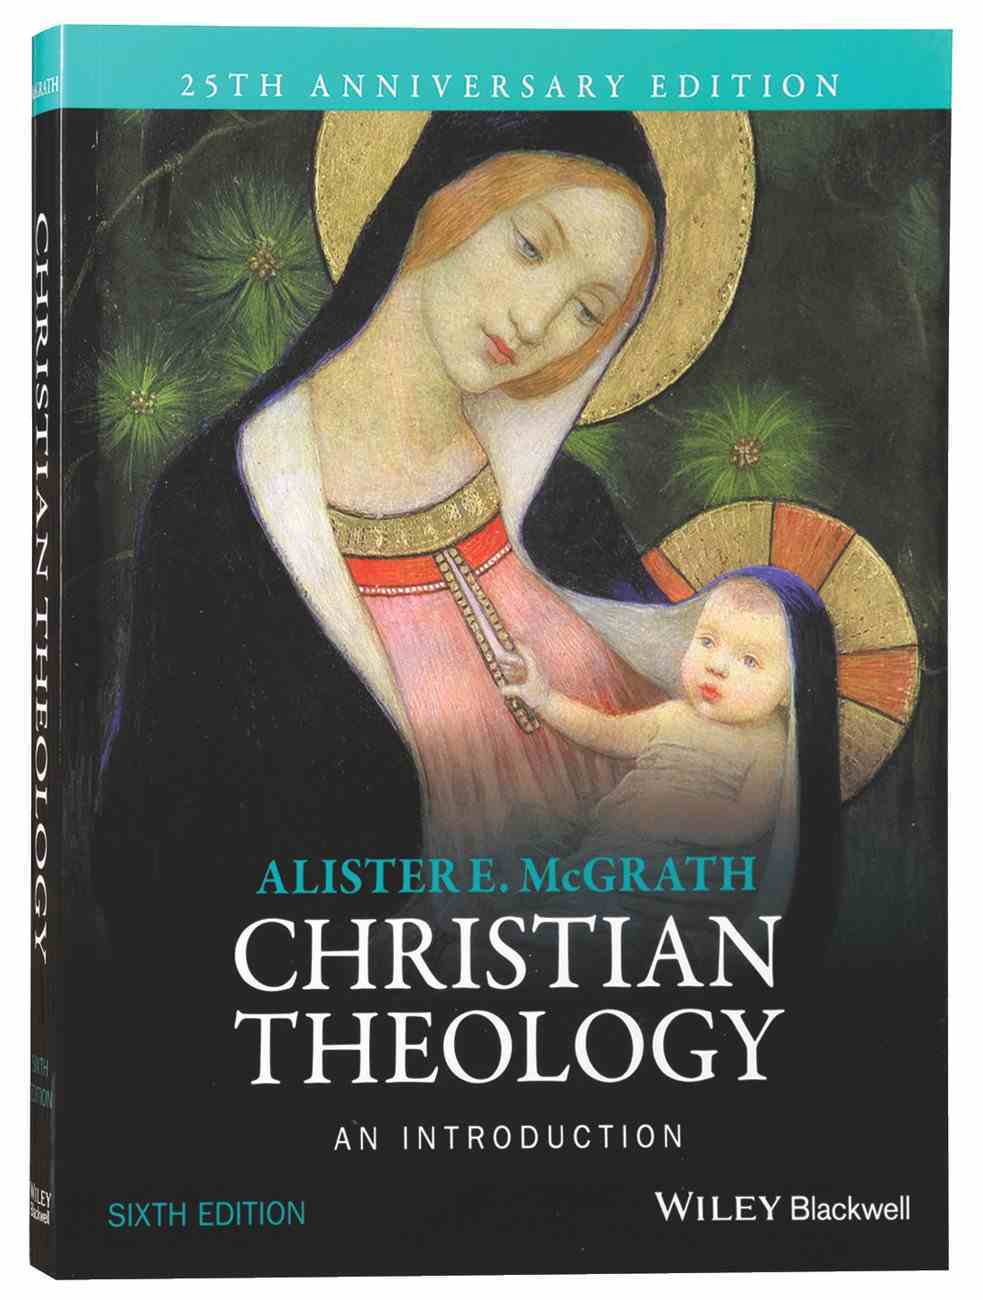 An Christian Theology (6th Edition - 25th Anniversary Edition) Paperback